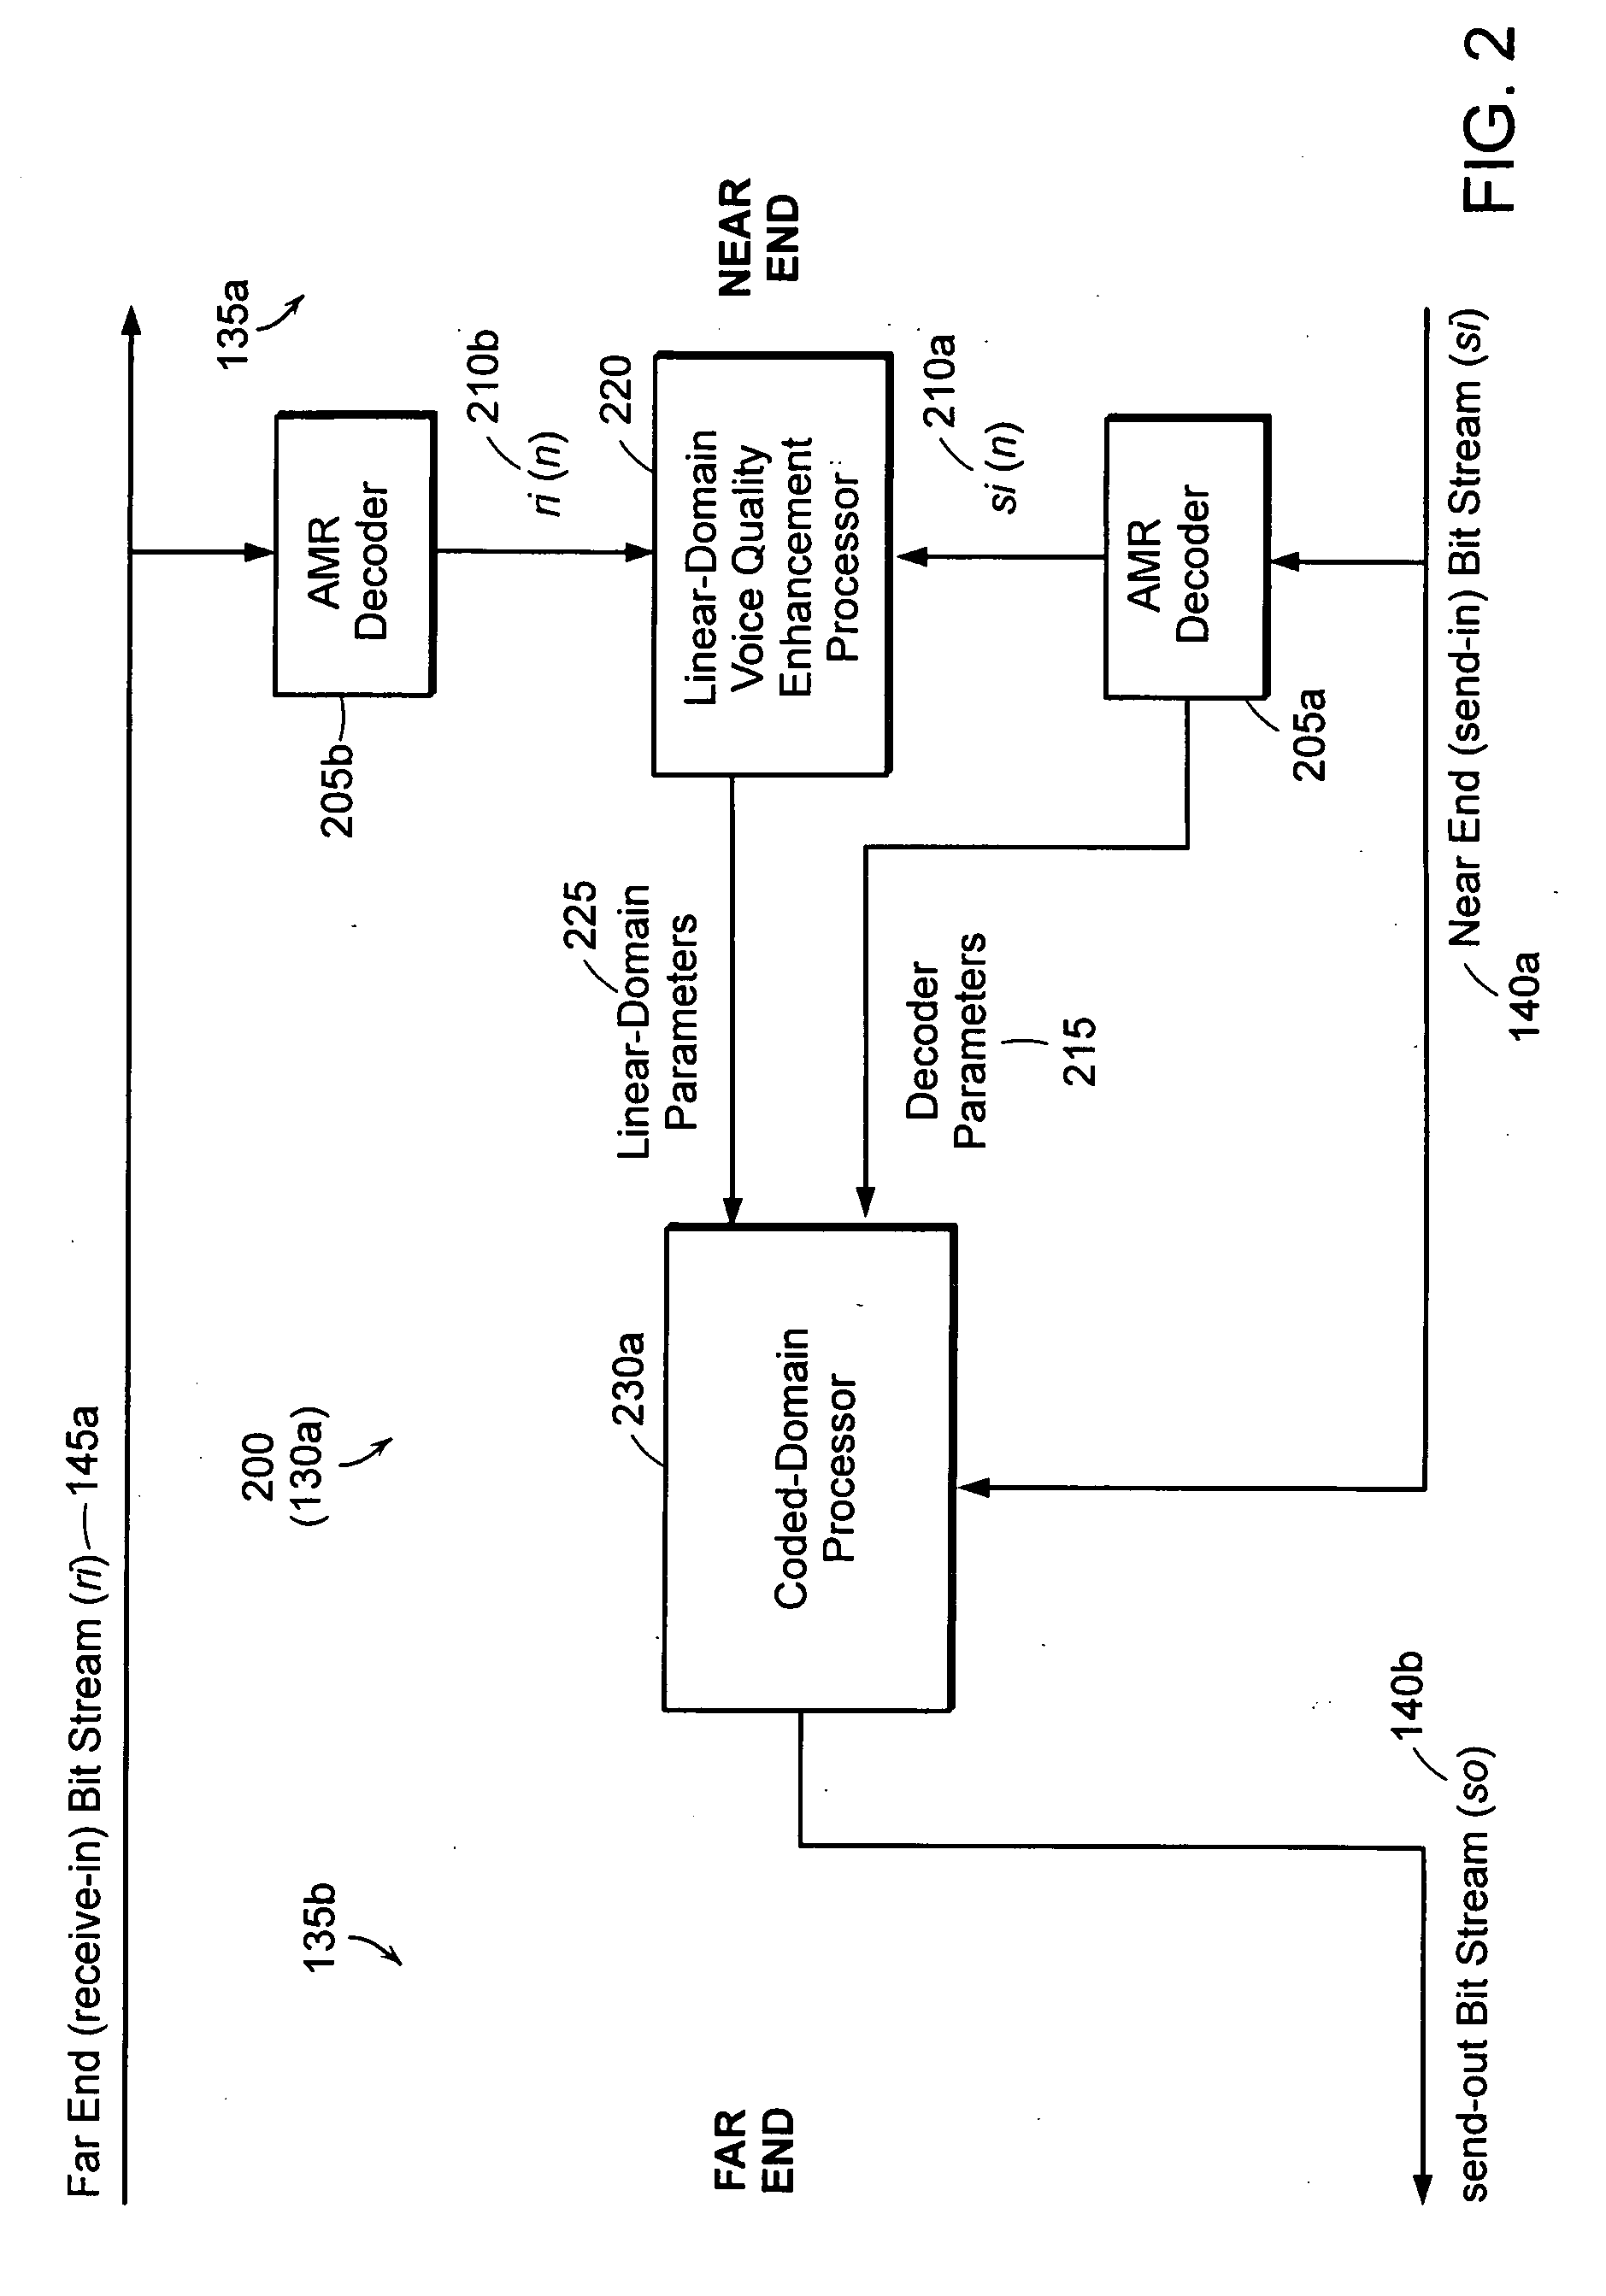 Method and apparatus for injecting comfort noise in a communications system